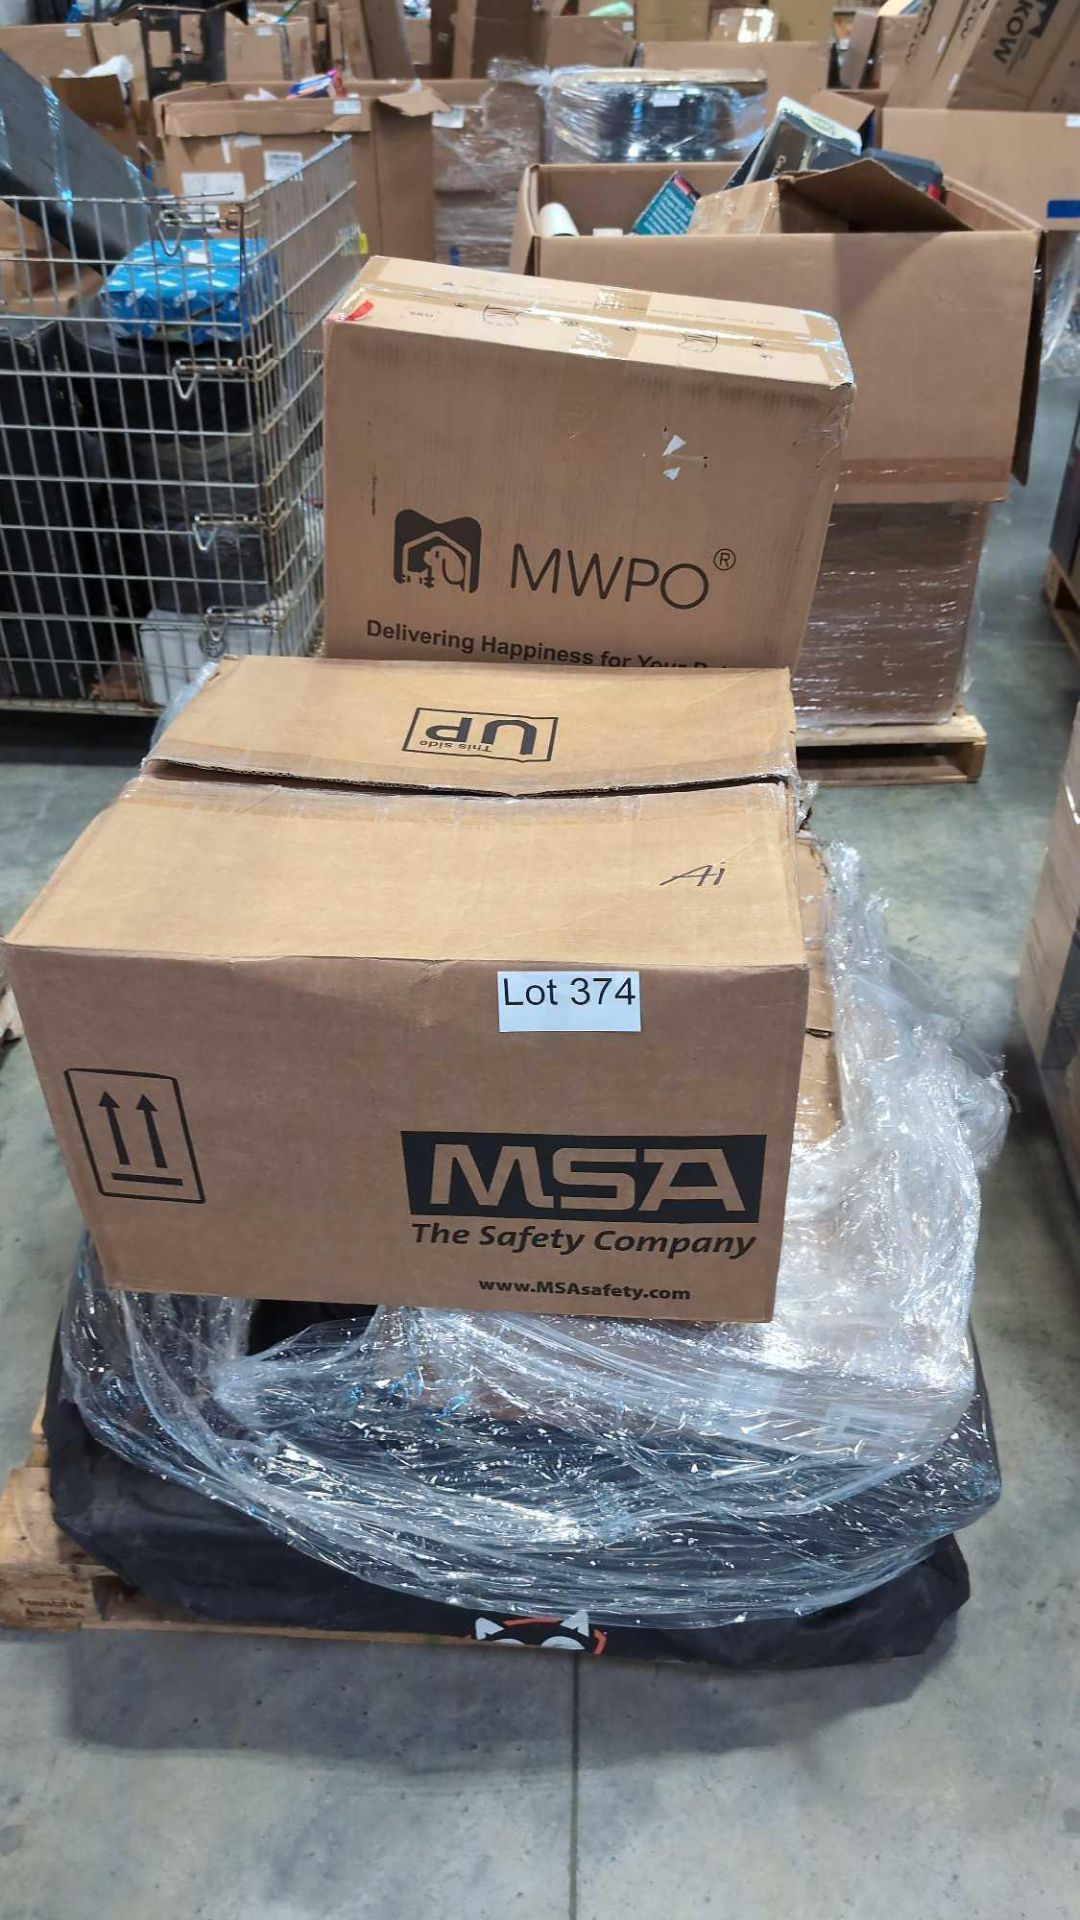 MSA Hard Hats, righline gear, pet supplies and more - Image 6 of 9